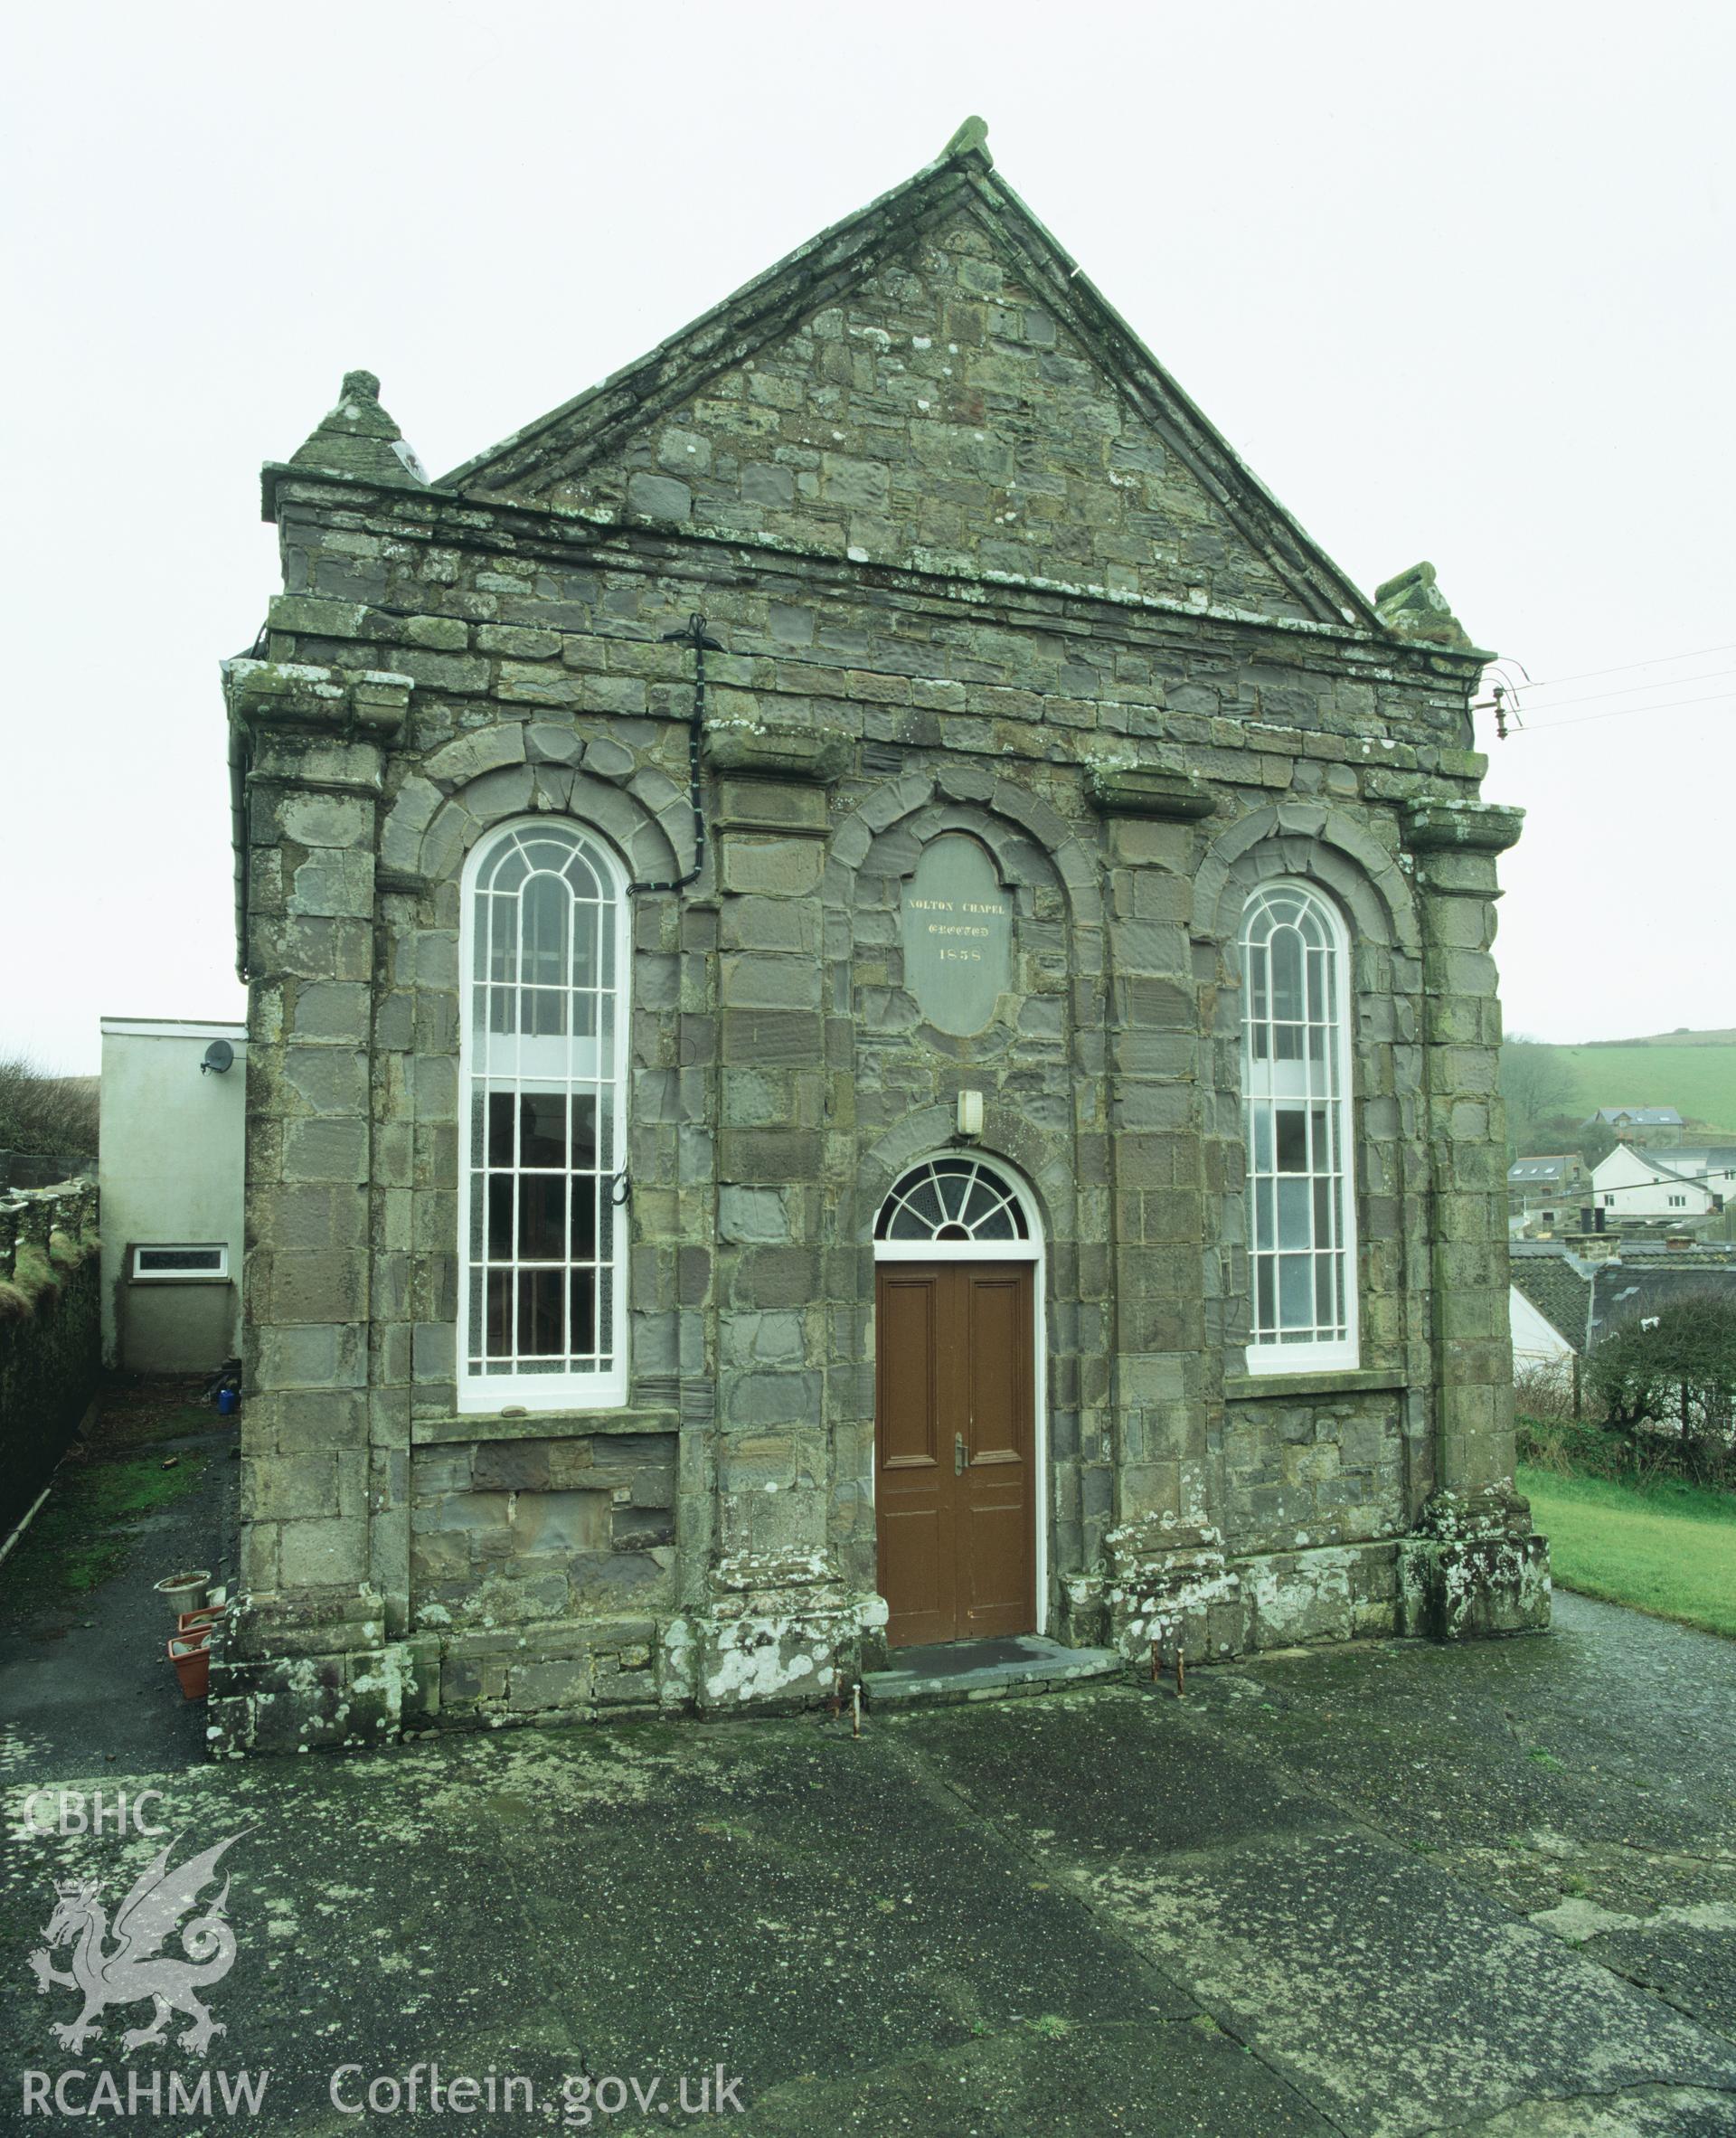 RCAHMW colour transparency showing Nolton Haven Chapel, taken by I.N. Wright, 2003.